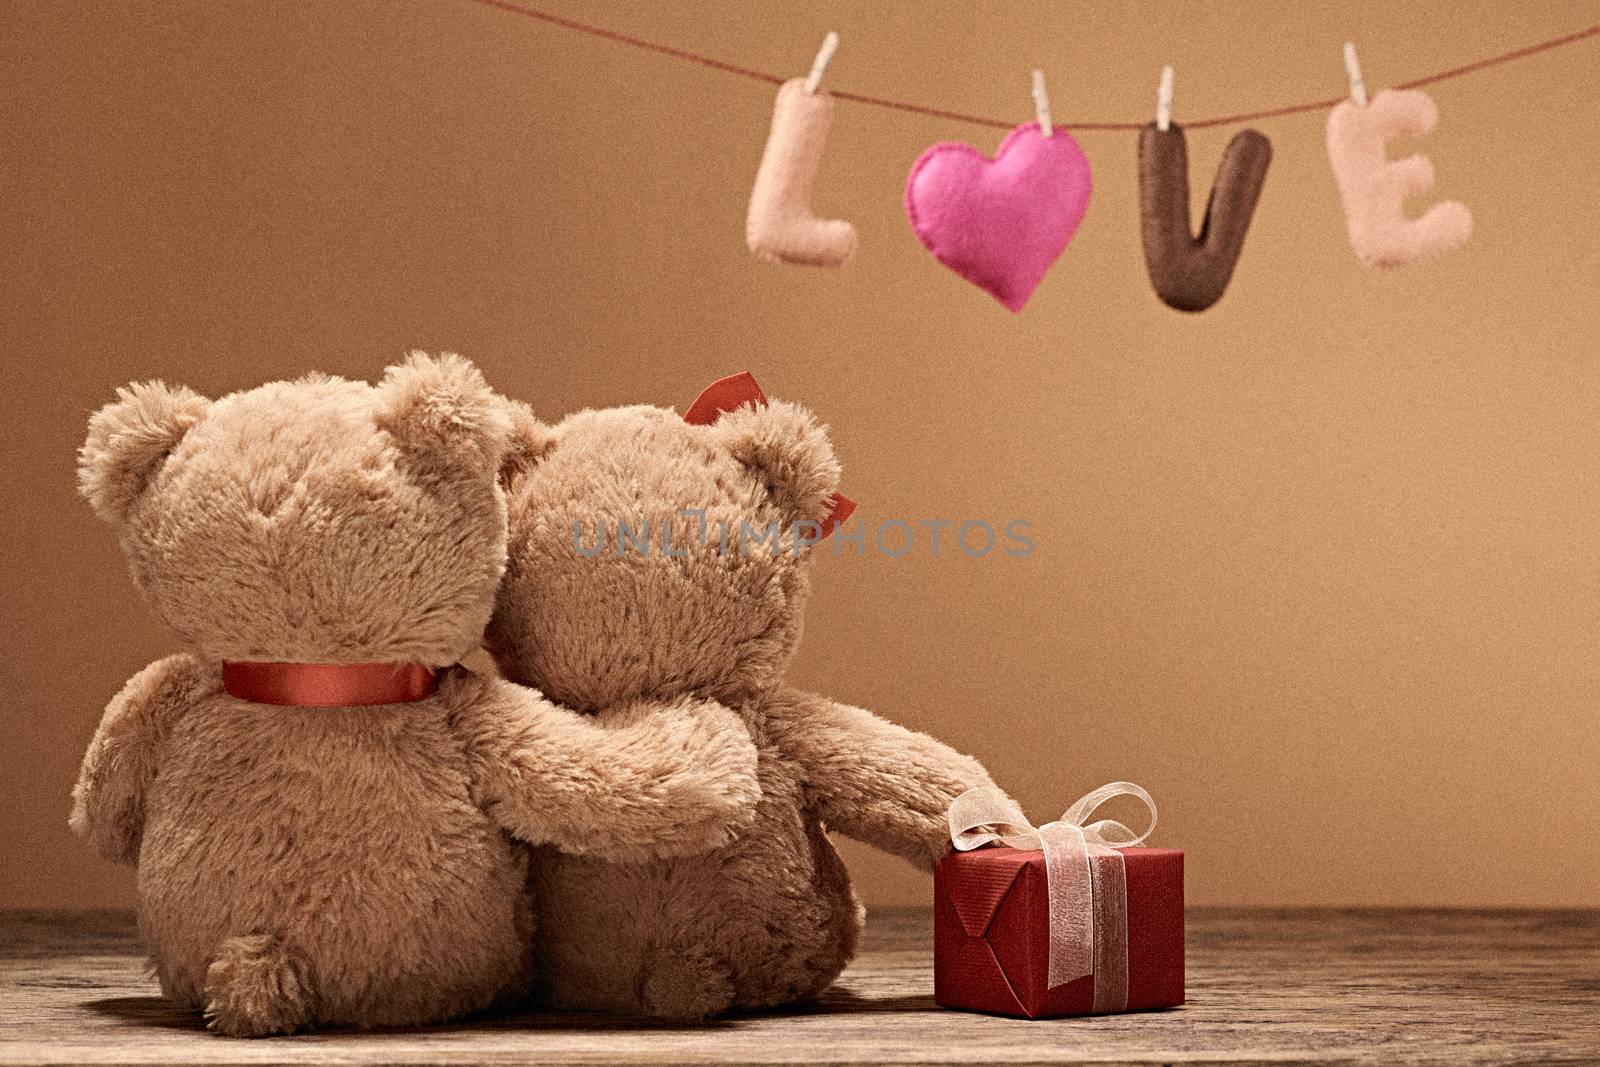 Valentines Day.Word Love heart.Couple Teddy Bears  by 918